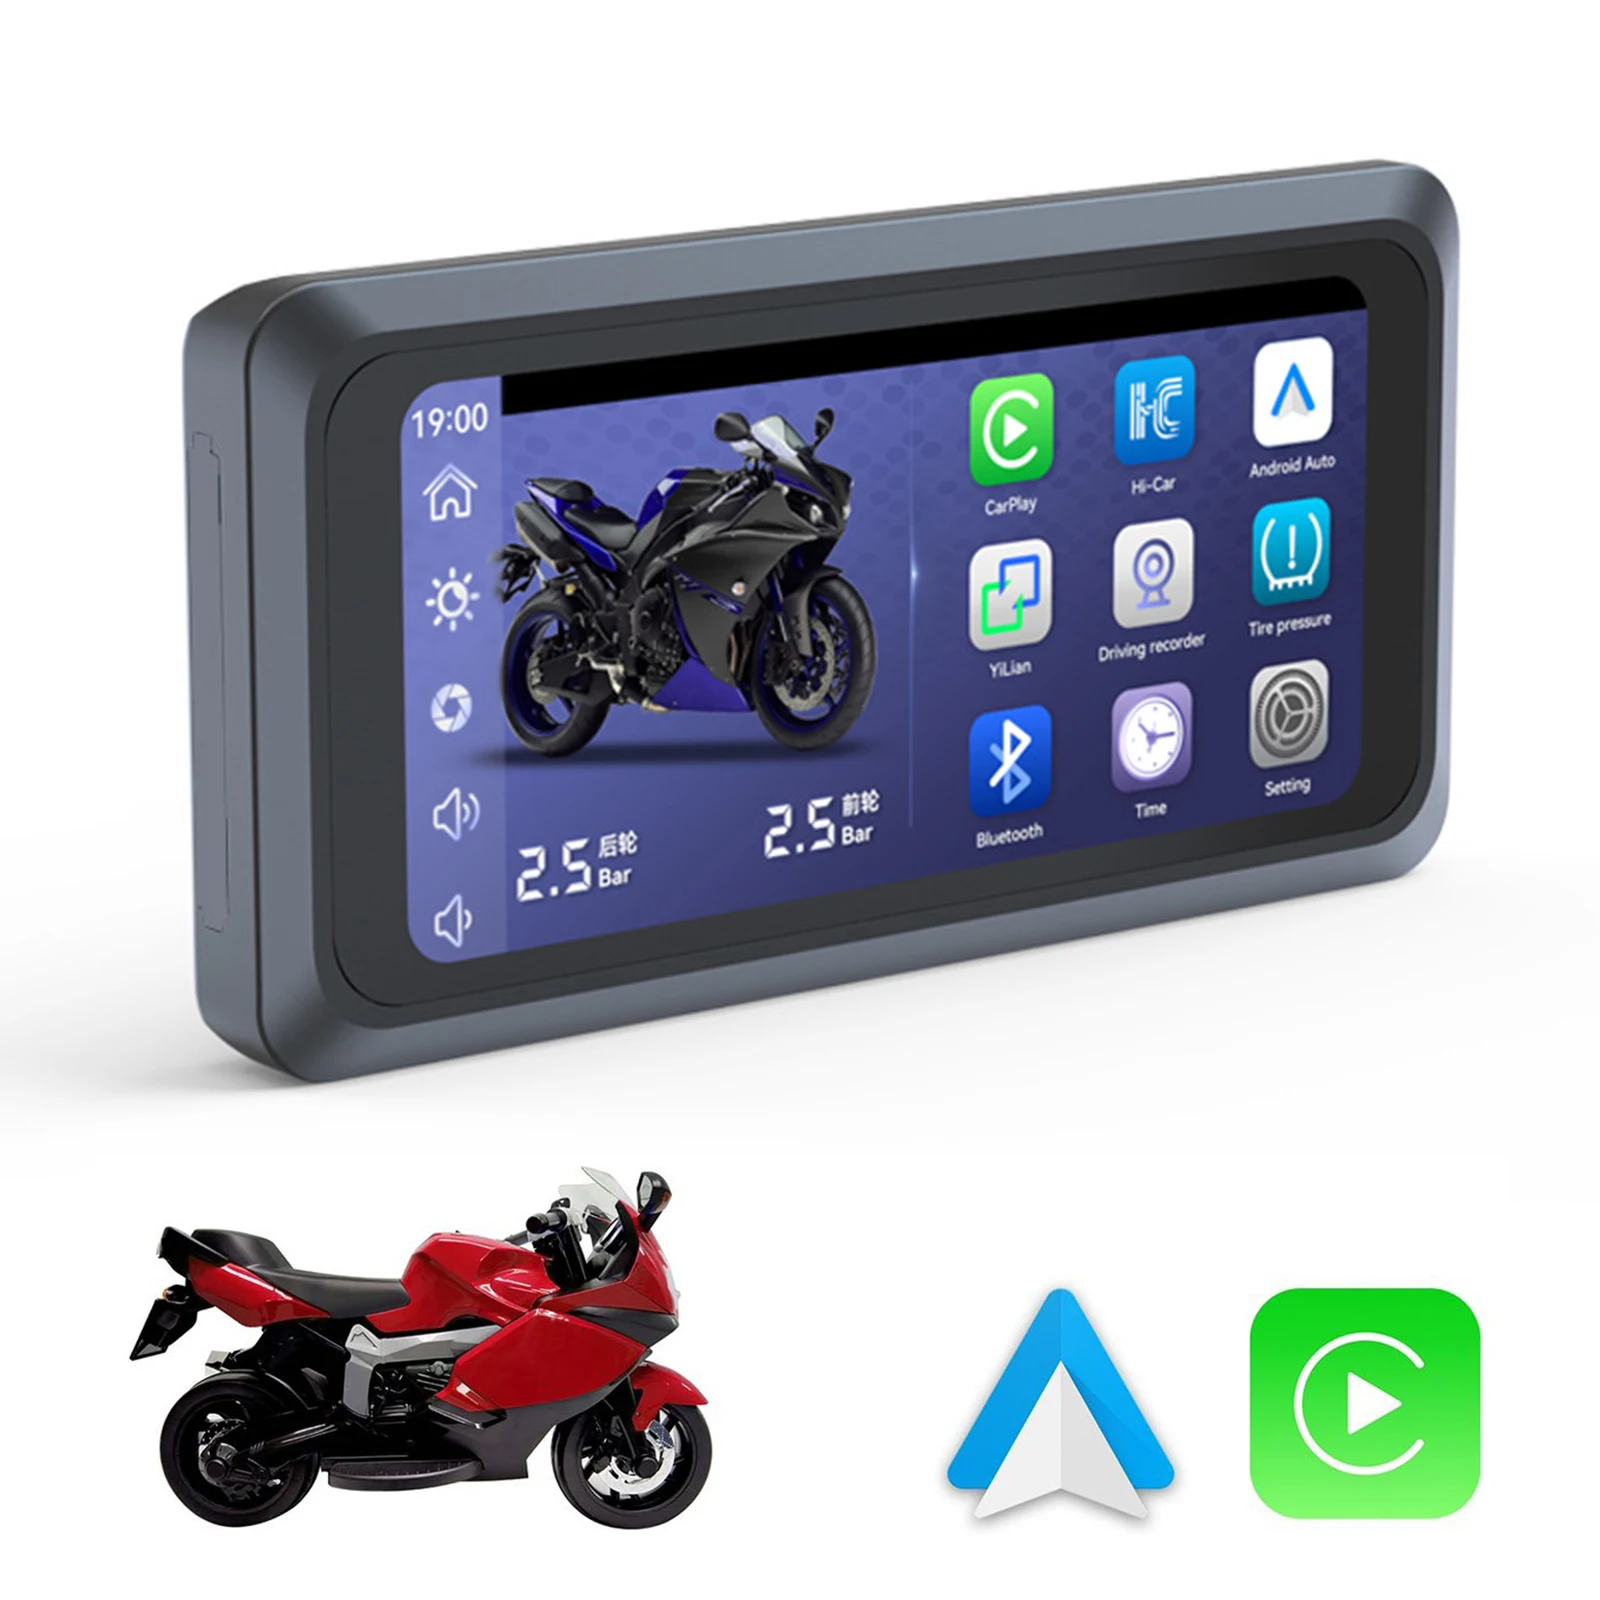 

6.25 Inch Motorcycle GPS Navigation Screen With TPMS IPX7 Waterproof Motorcycle Carplay Display Motorcycle Wireless Android Auto